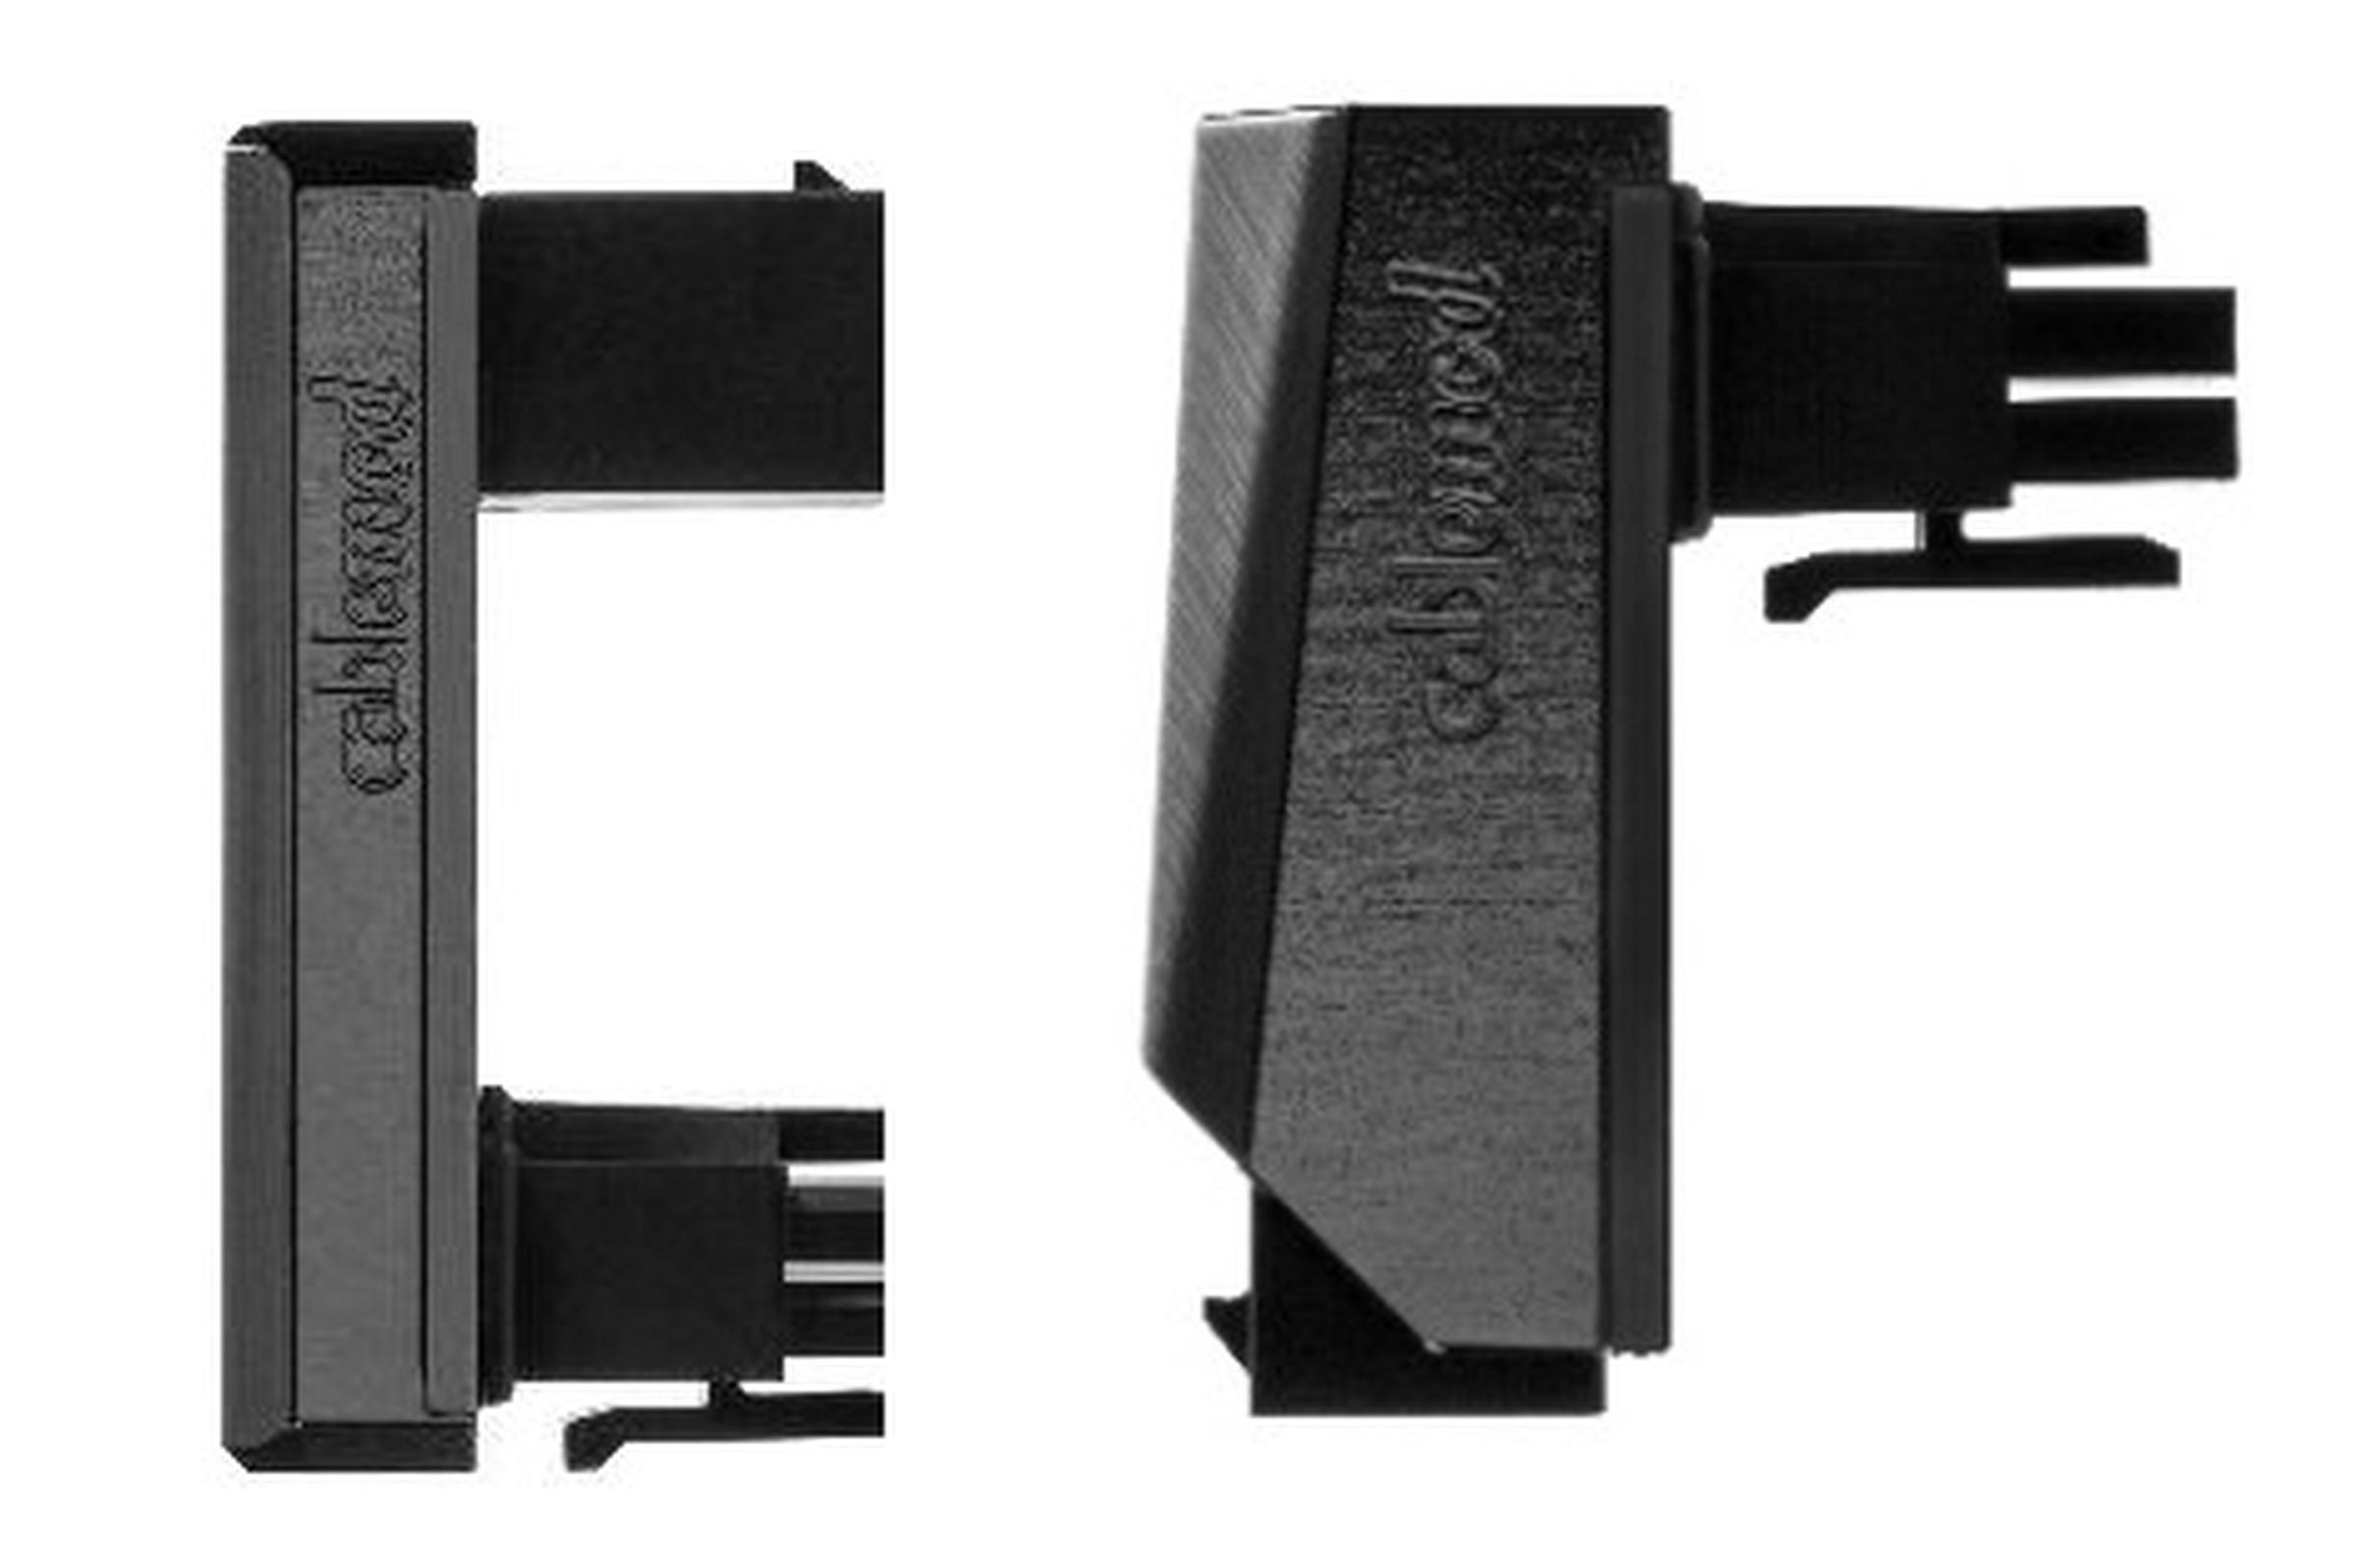 Two of the recalled Cablemod adapters.